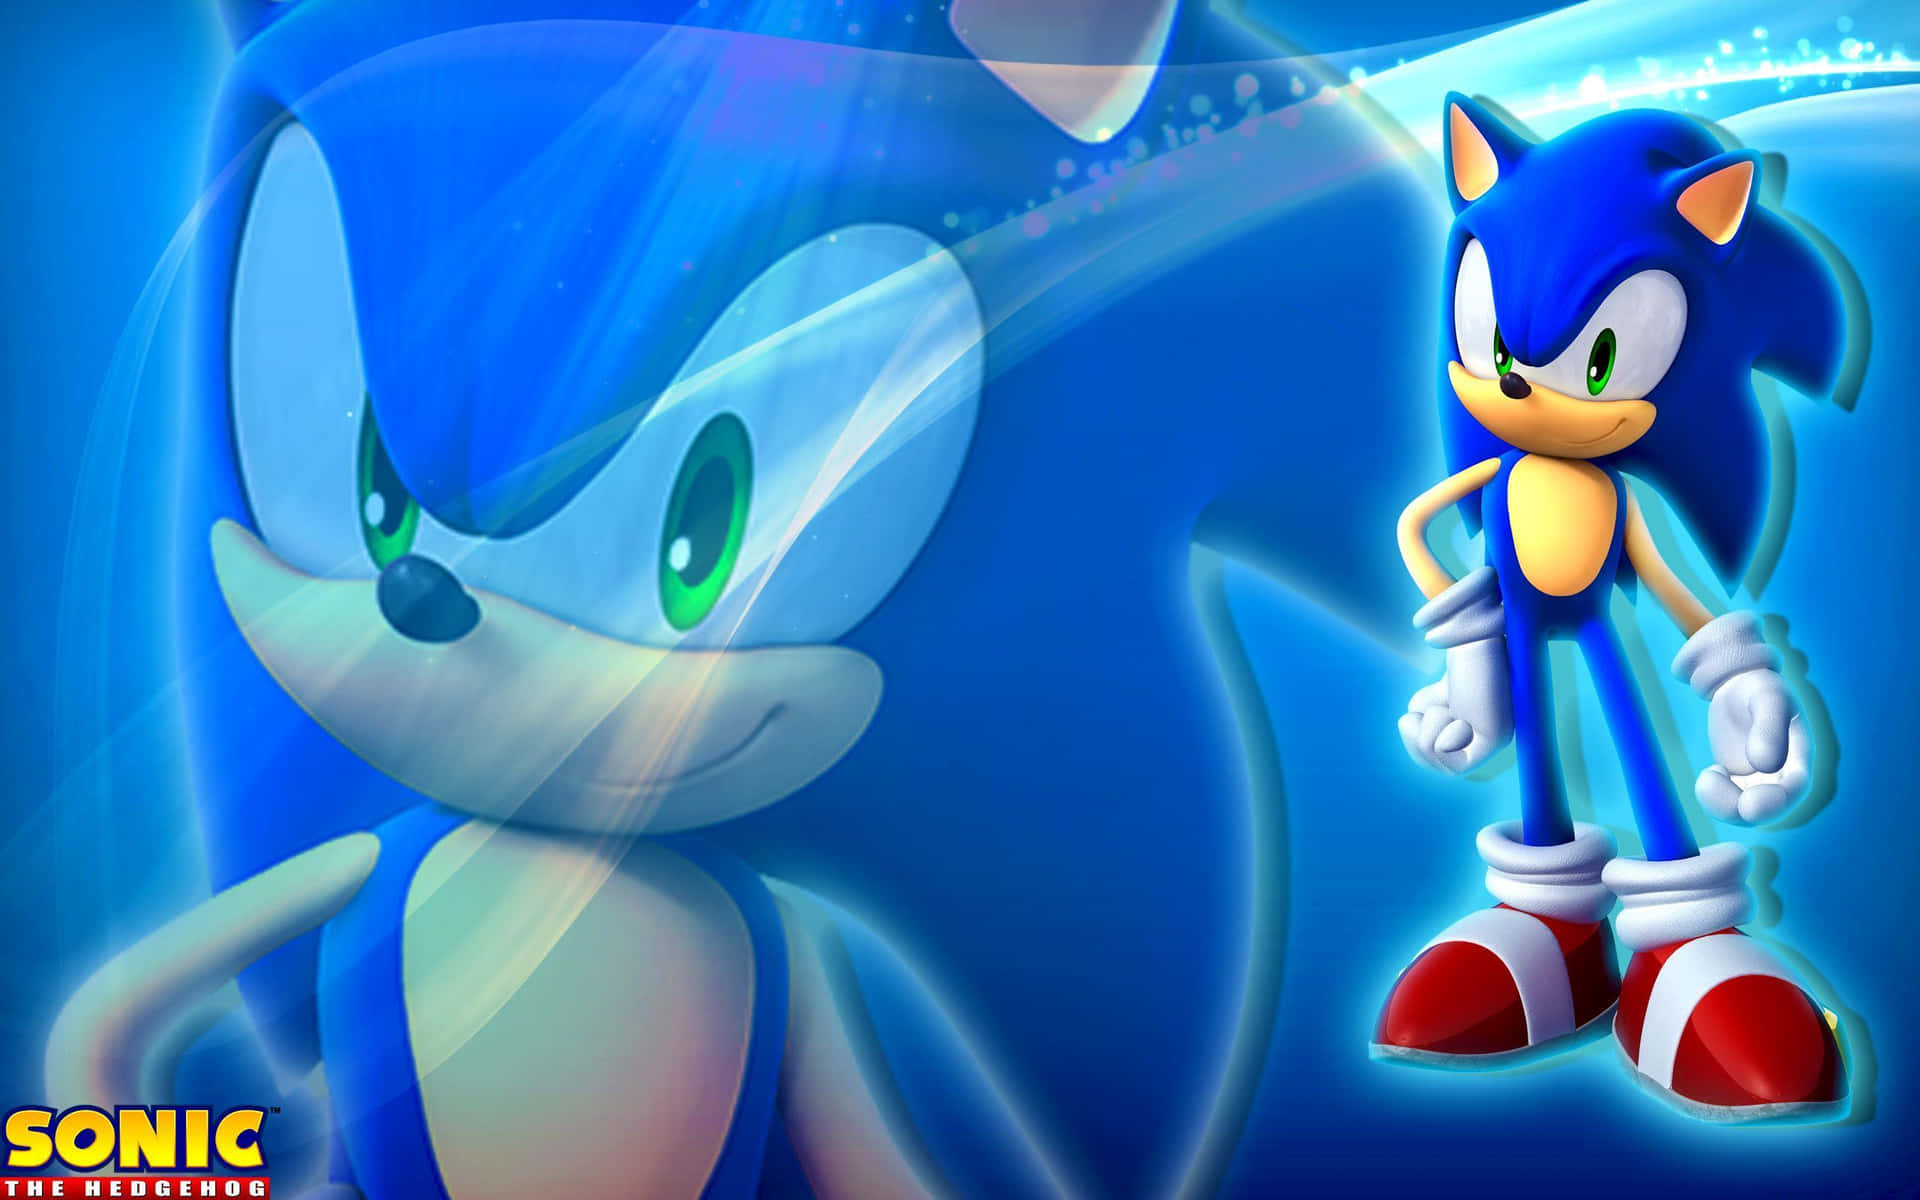 Sonic The Hedgehog Characters in Action Wallpaper